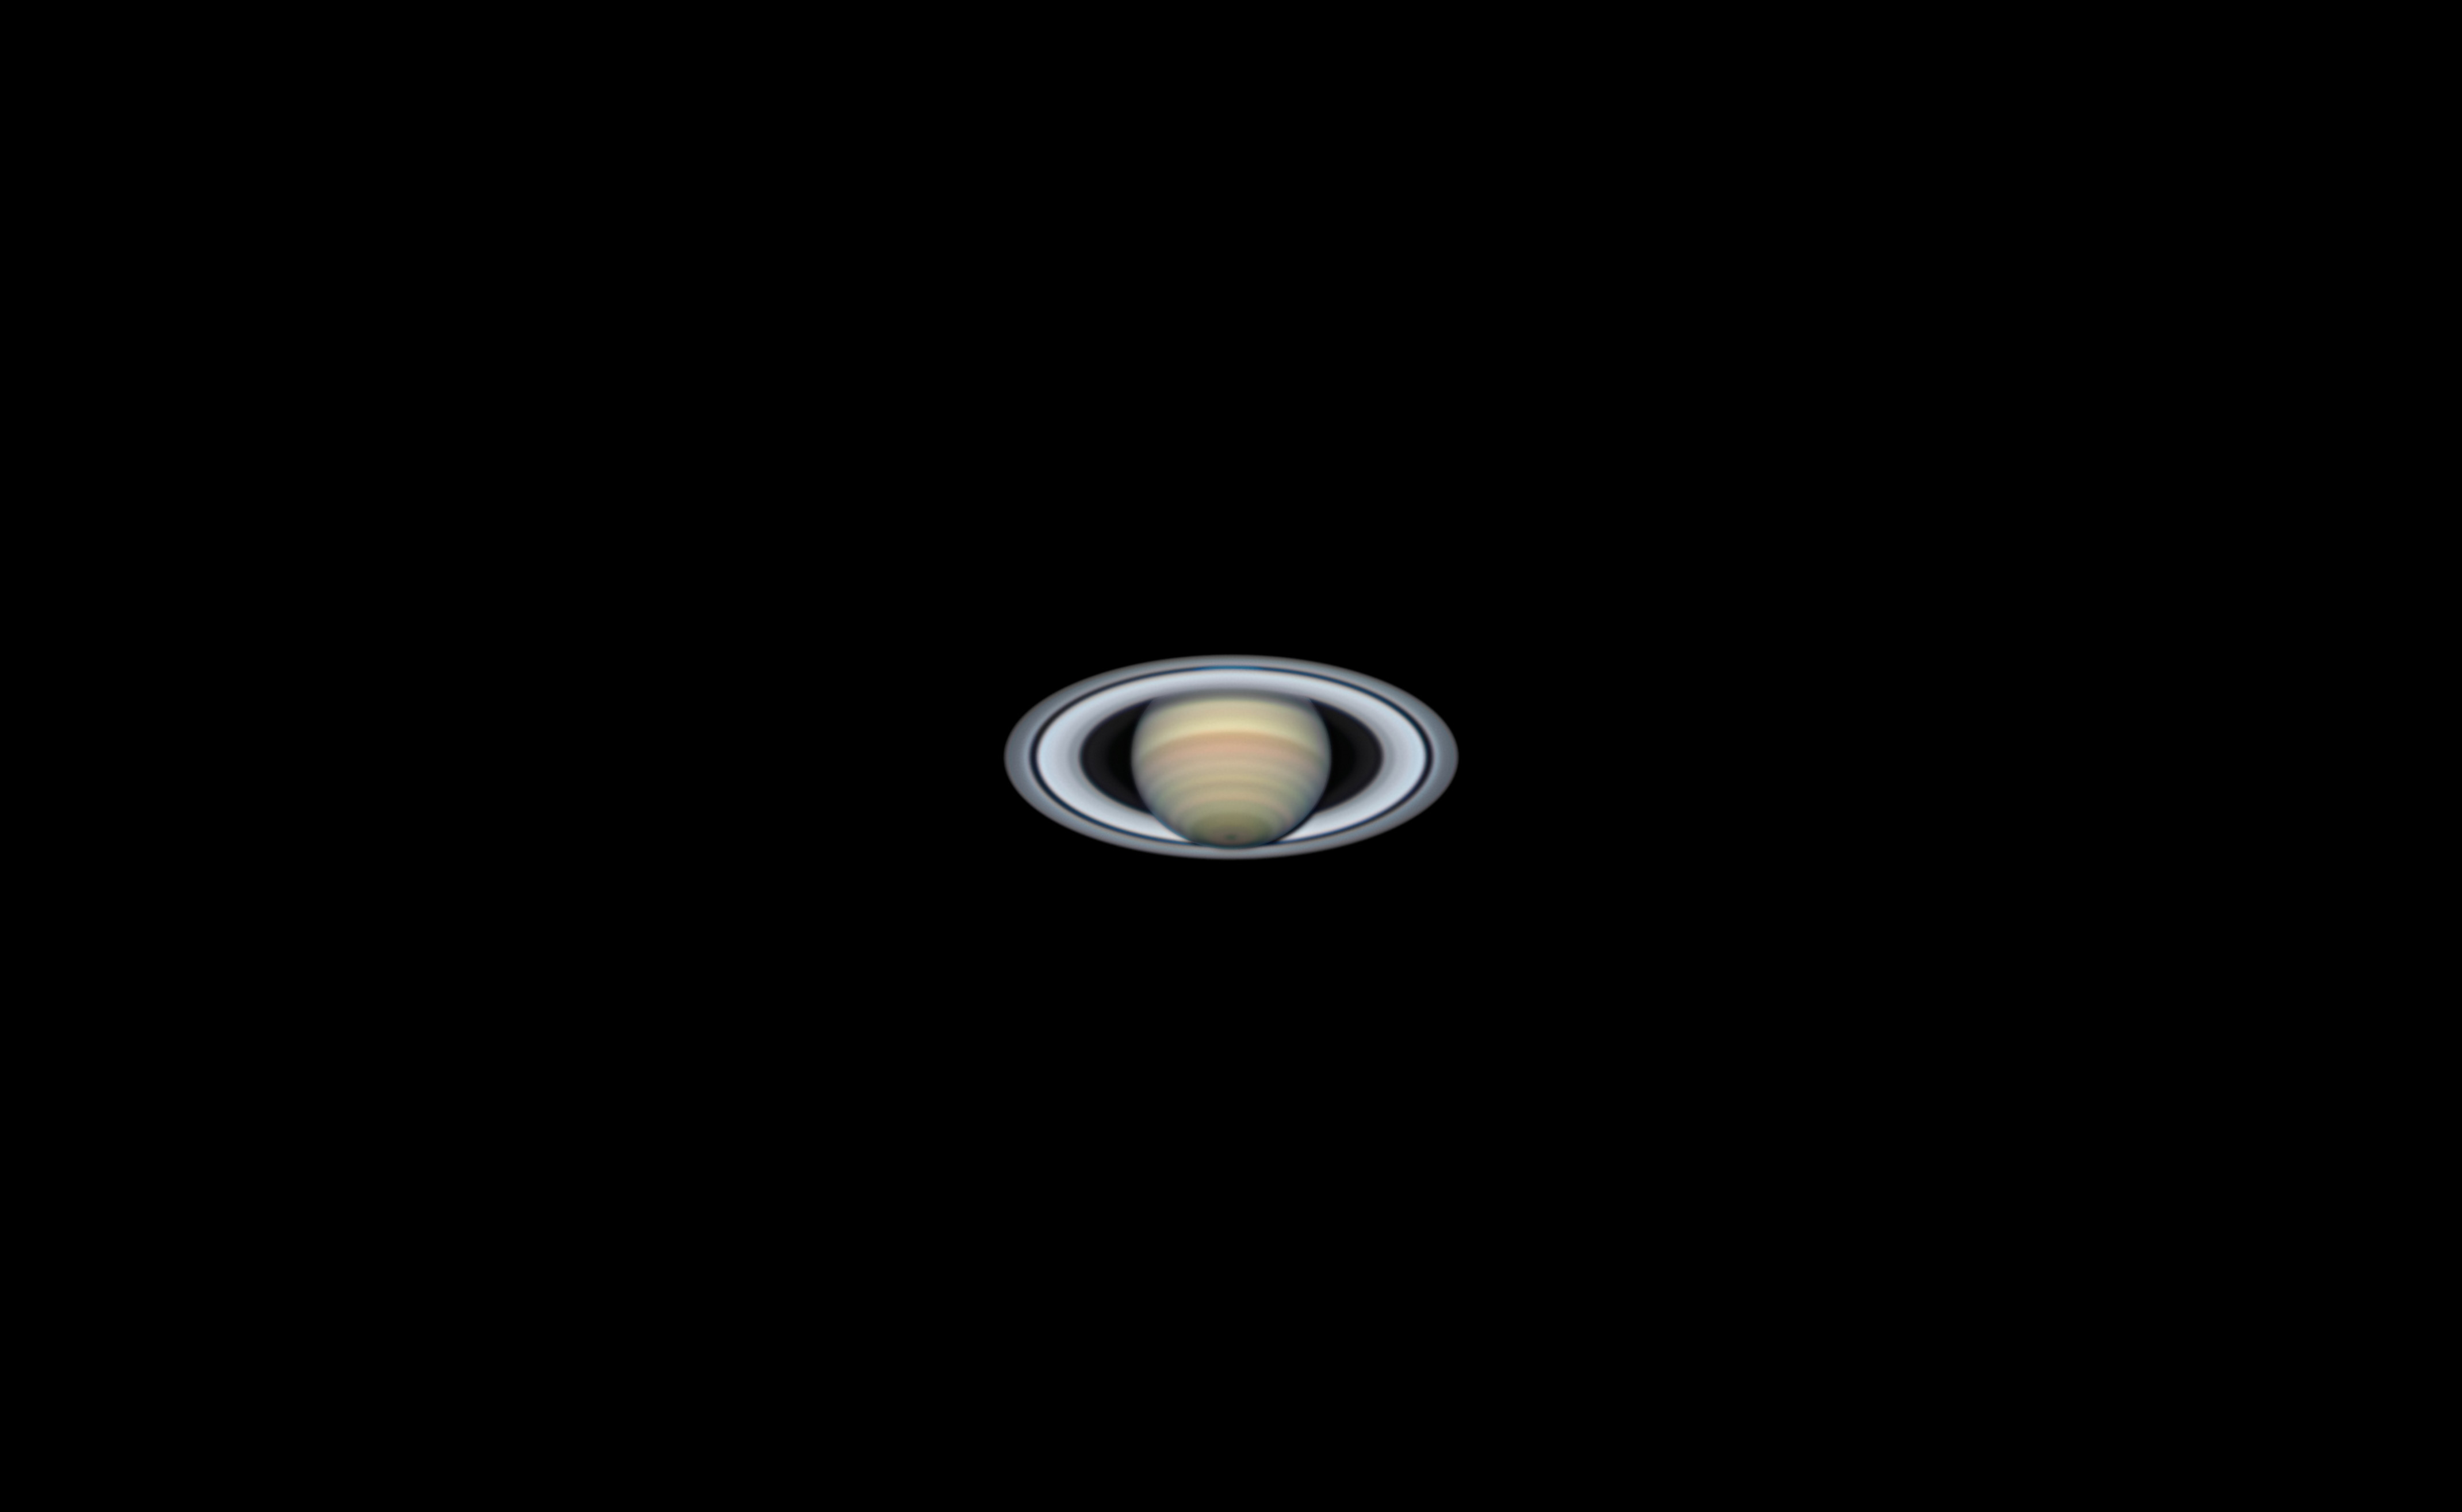 Saturn, about as it appears visually in an optically excellent 12-inch telescope during rock-steady seeing.